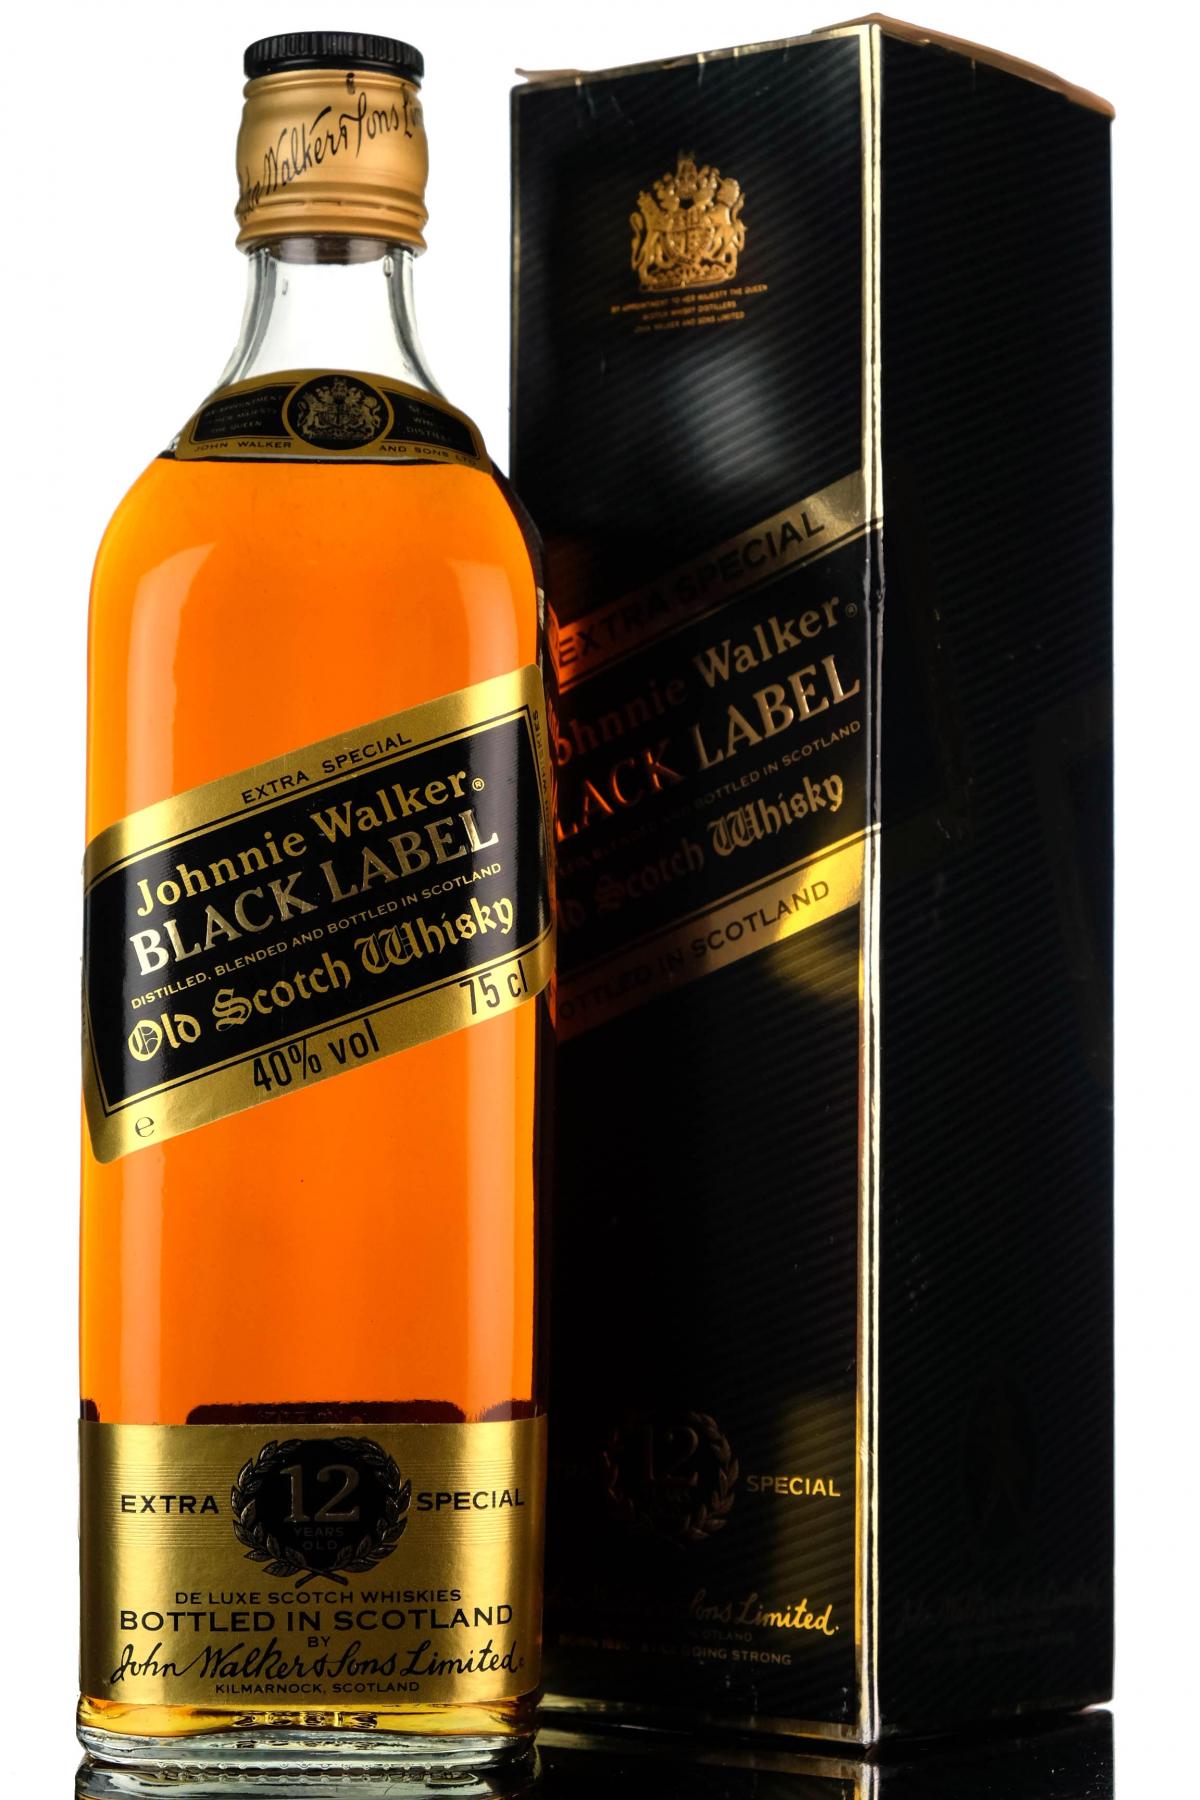 Johnnie Walker 12 Year Old - Black Label - Extra Special - 1980s